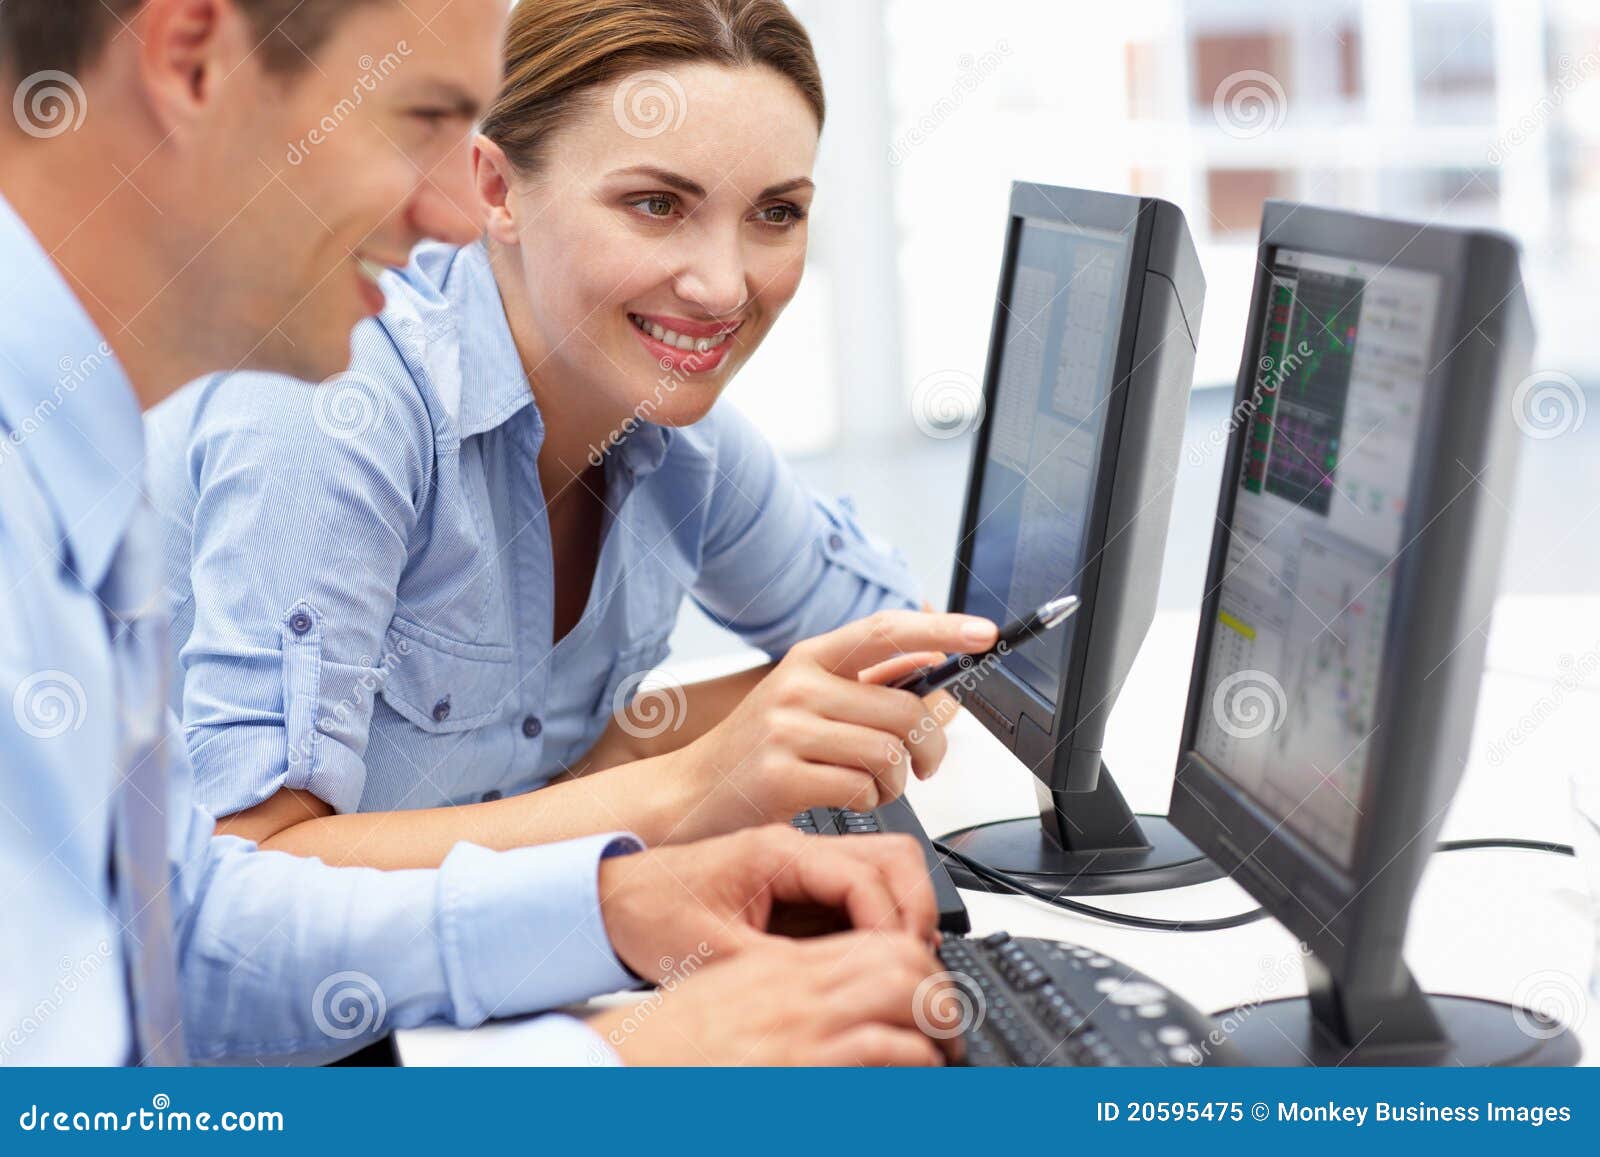 businessman and woman working on computers